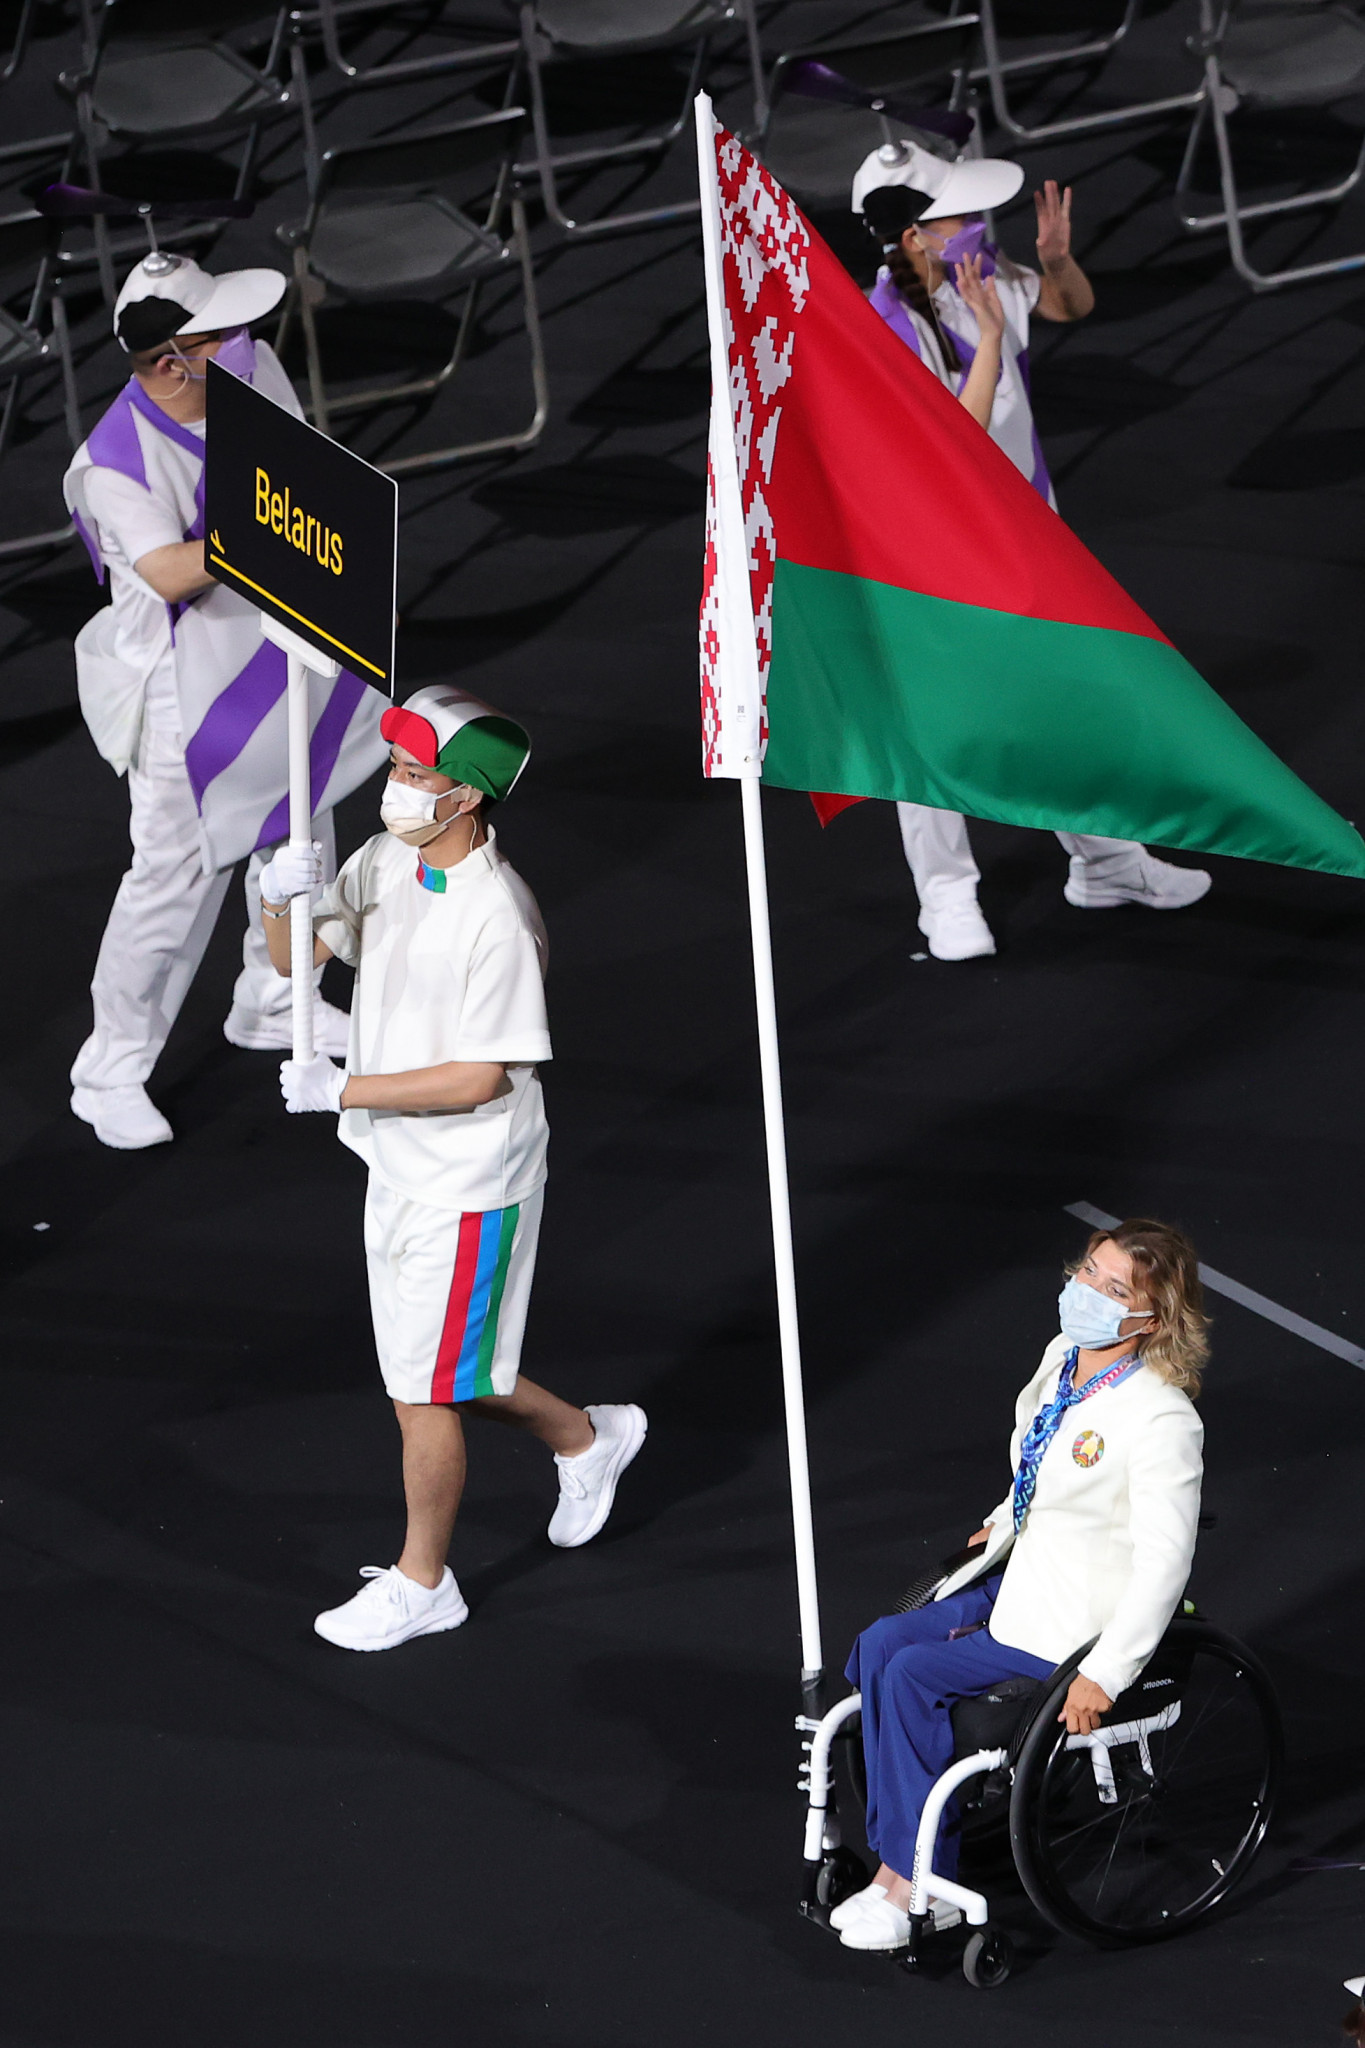 The suspension of the Belarus NPC has been set aside but its athletes remain banned ©Getty Images